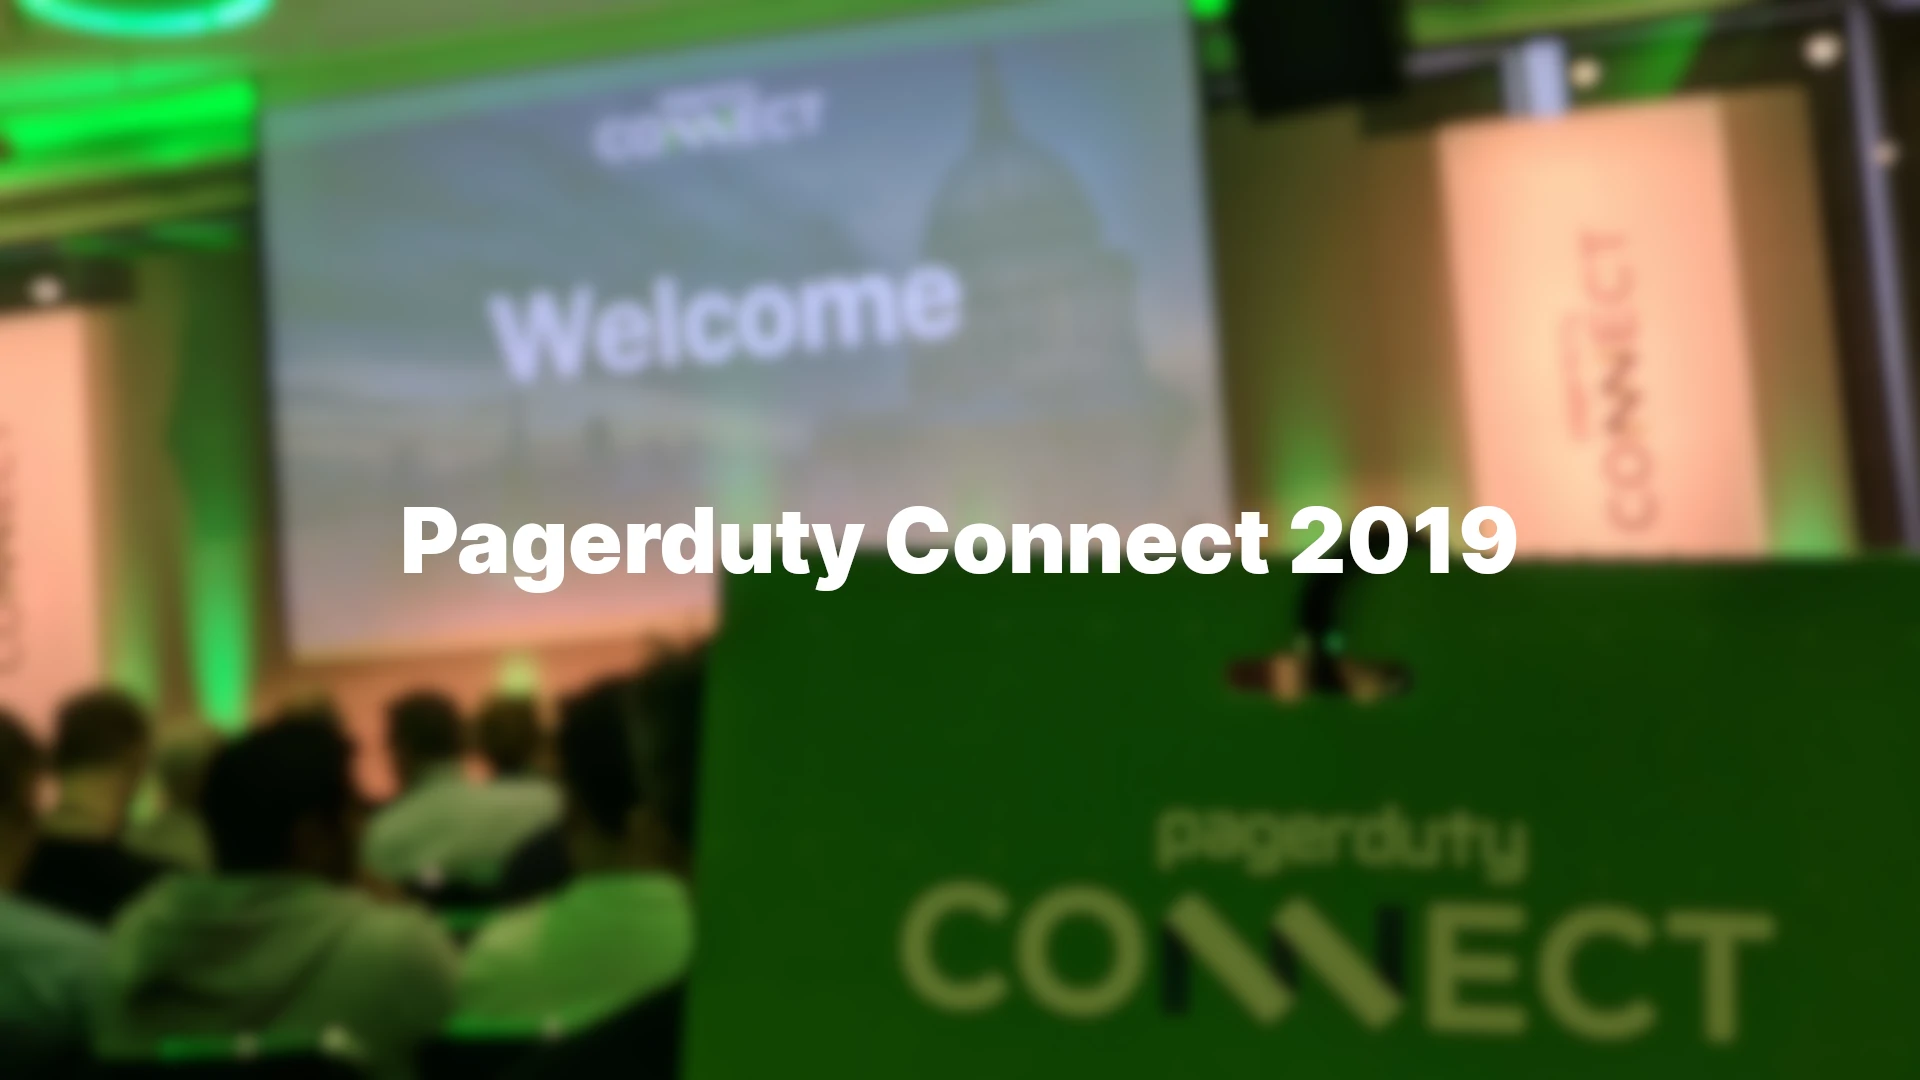 Licence To Page - What I learned from Pagerduty Connect: London